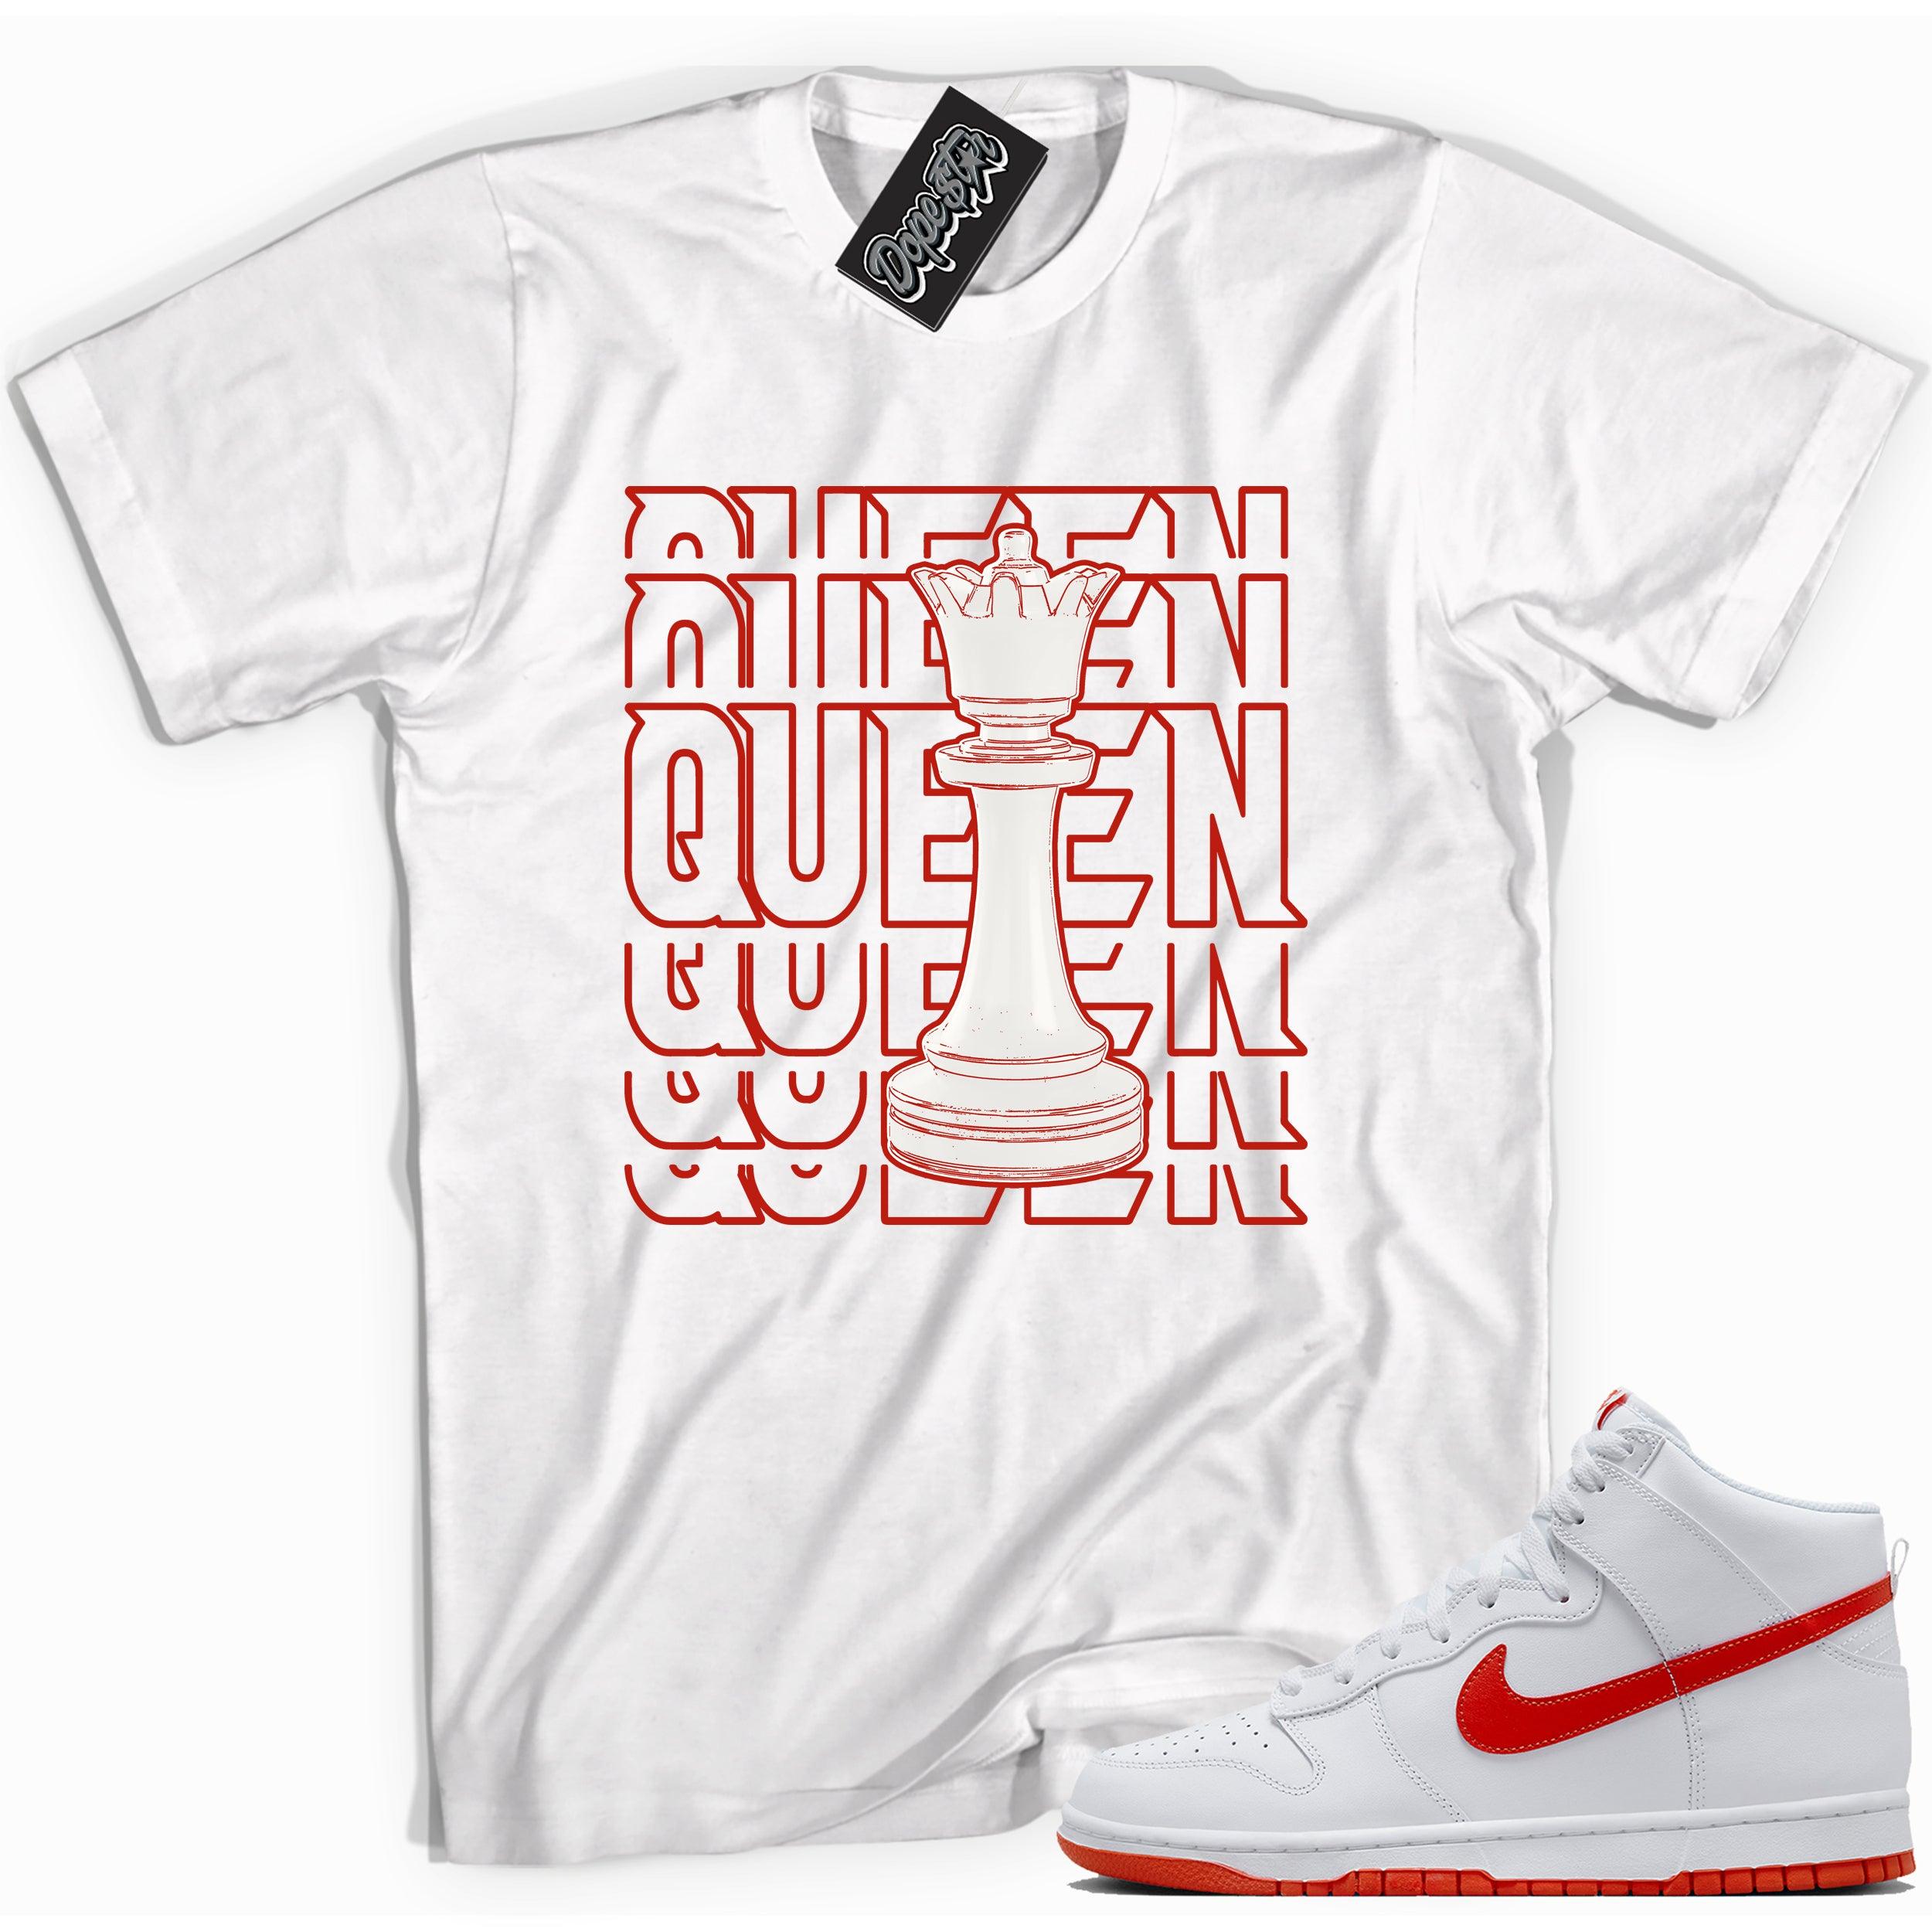 Cool white graphic tee with 'queen piece' print, that perfectly matches Nike Dunk High White Picante Red sneakers.